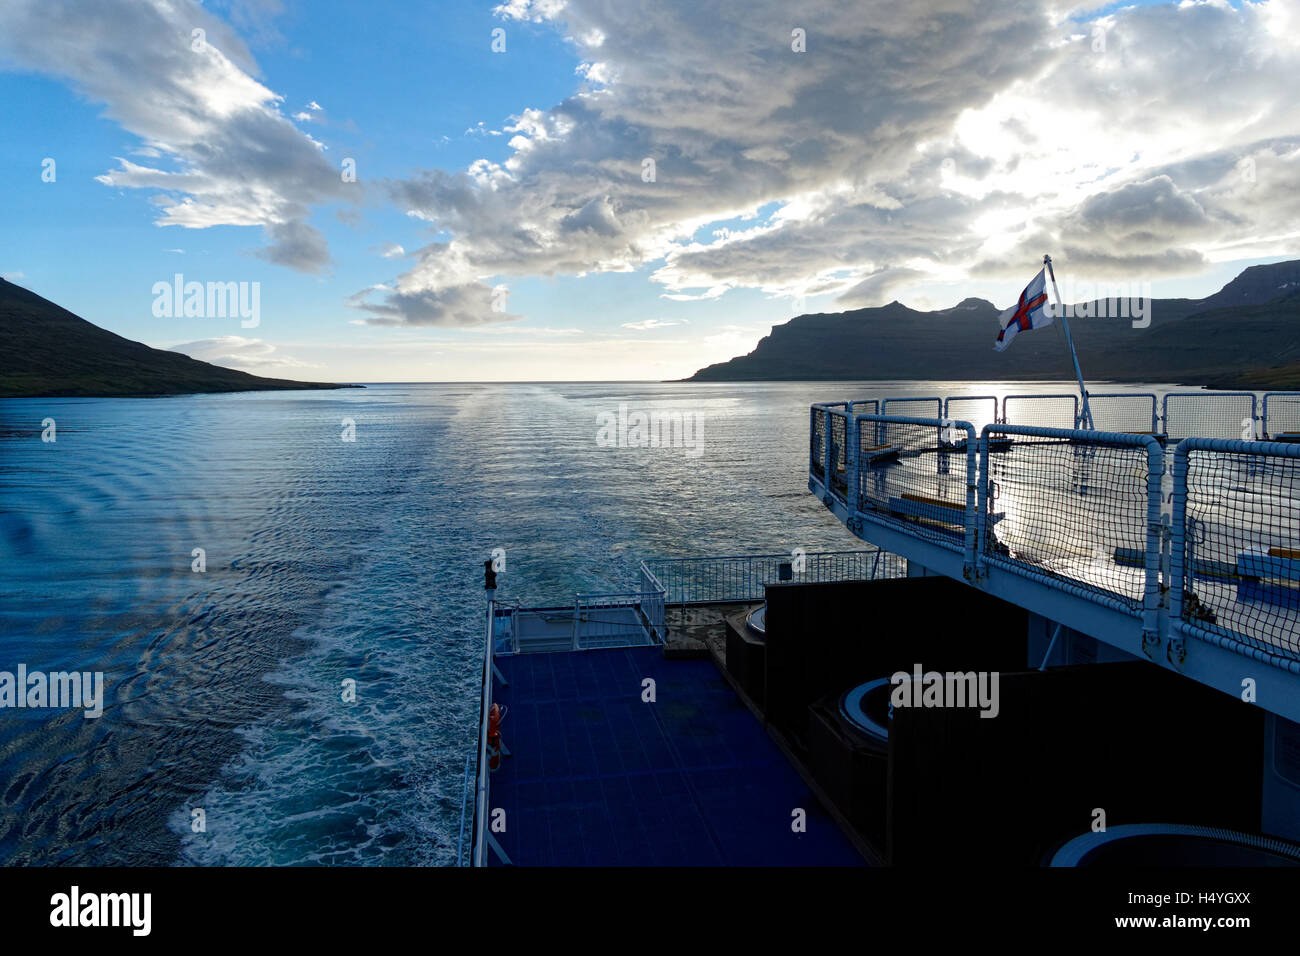 Seyoisfjord seen from the stern of a ferry boat, Seyoisfjord, Iceland, North Atlantic, Europe Stock Photo